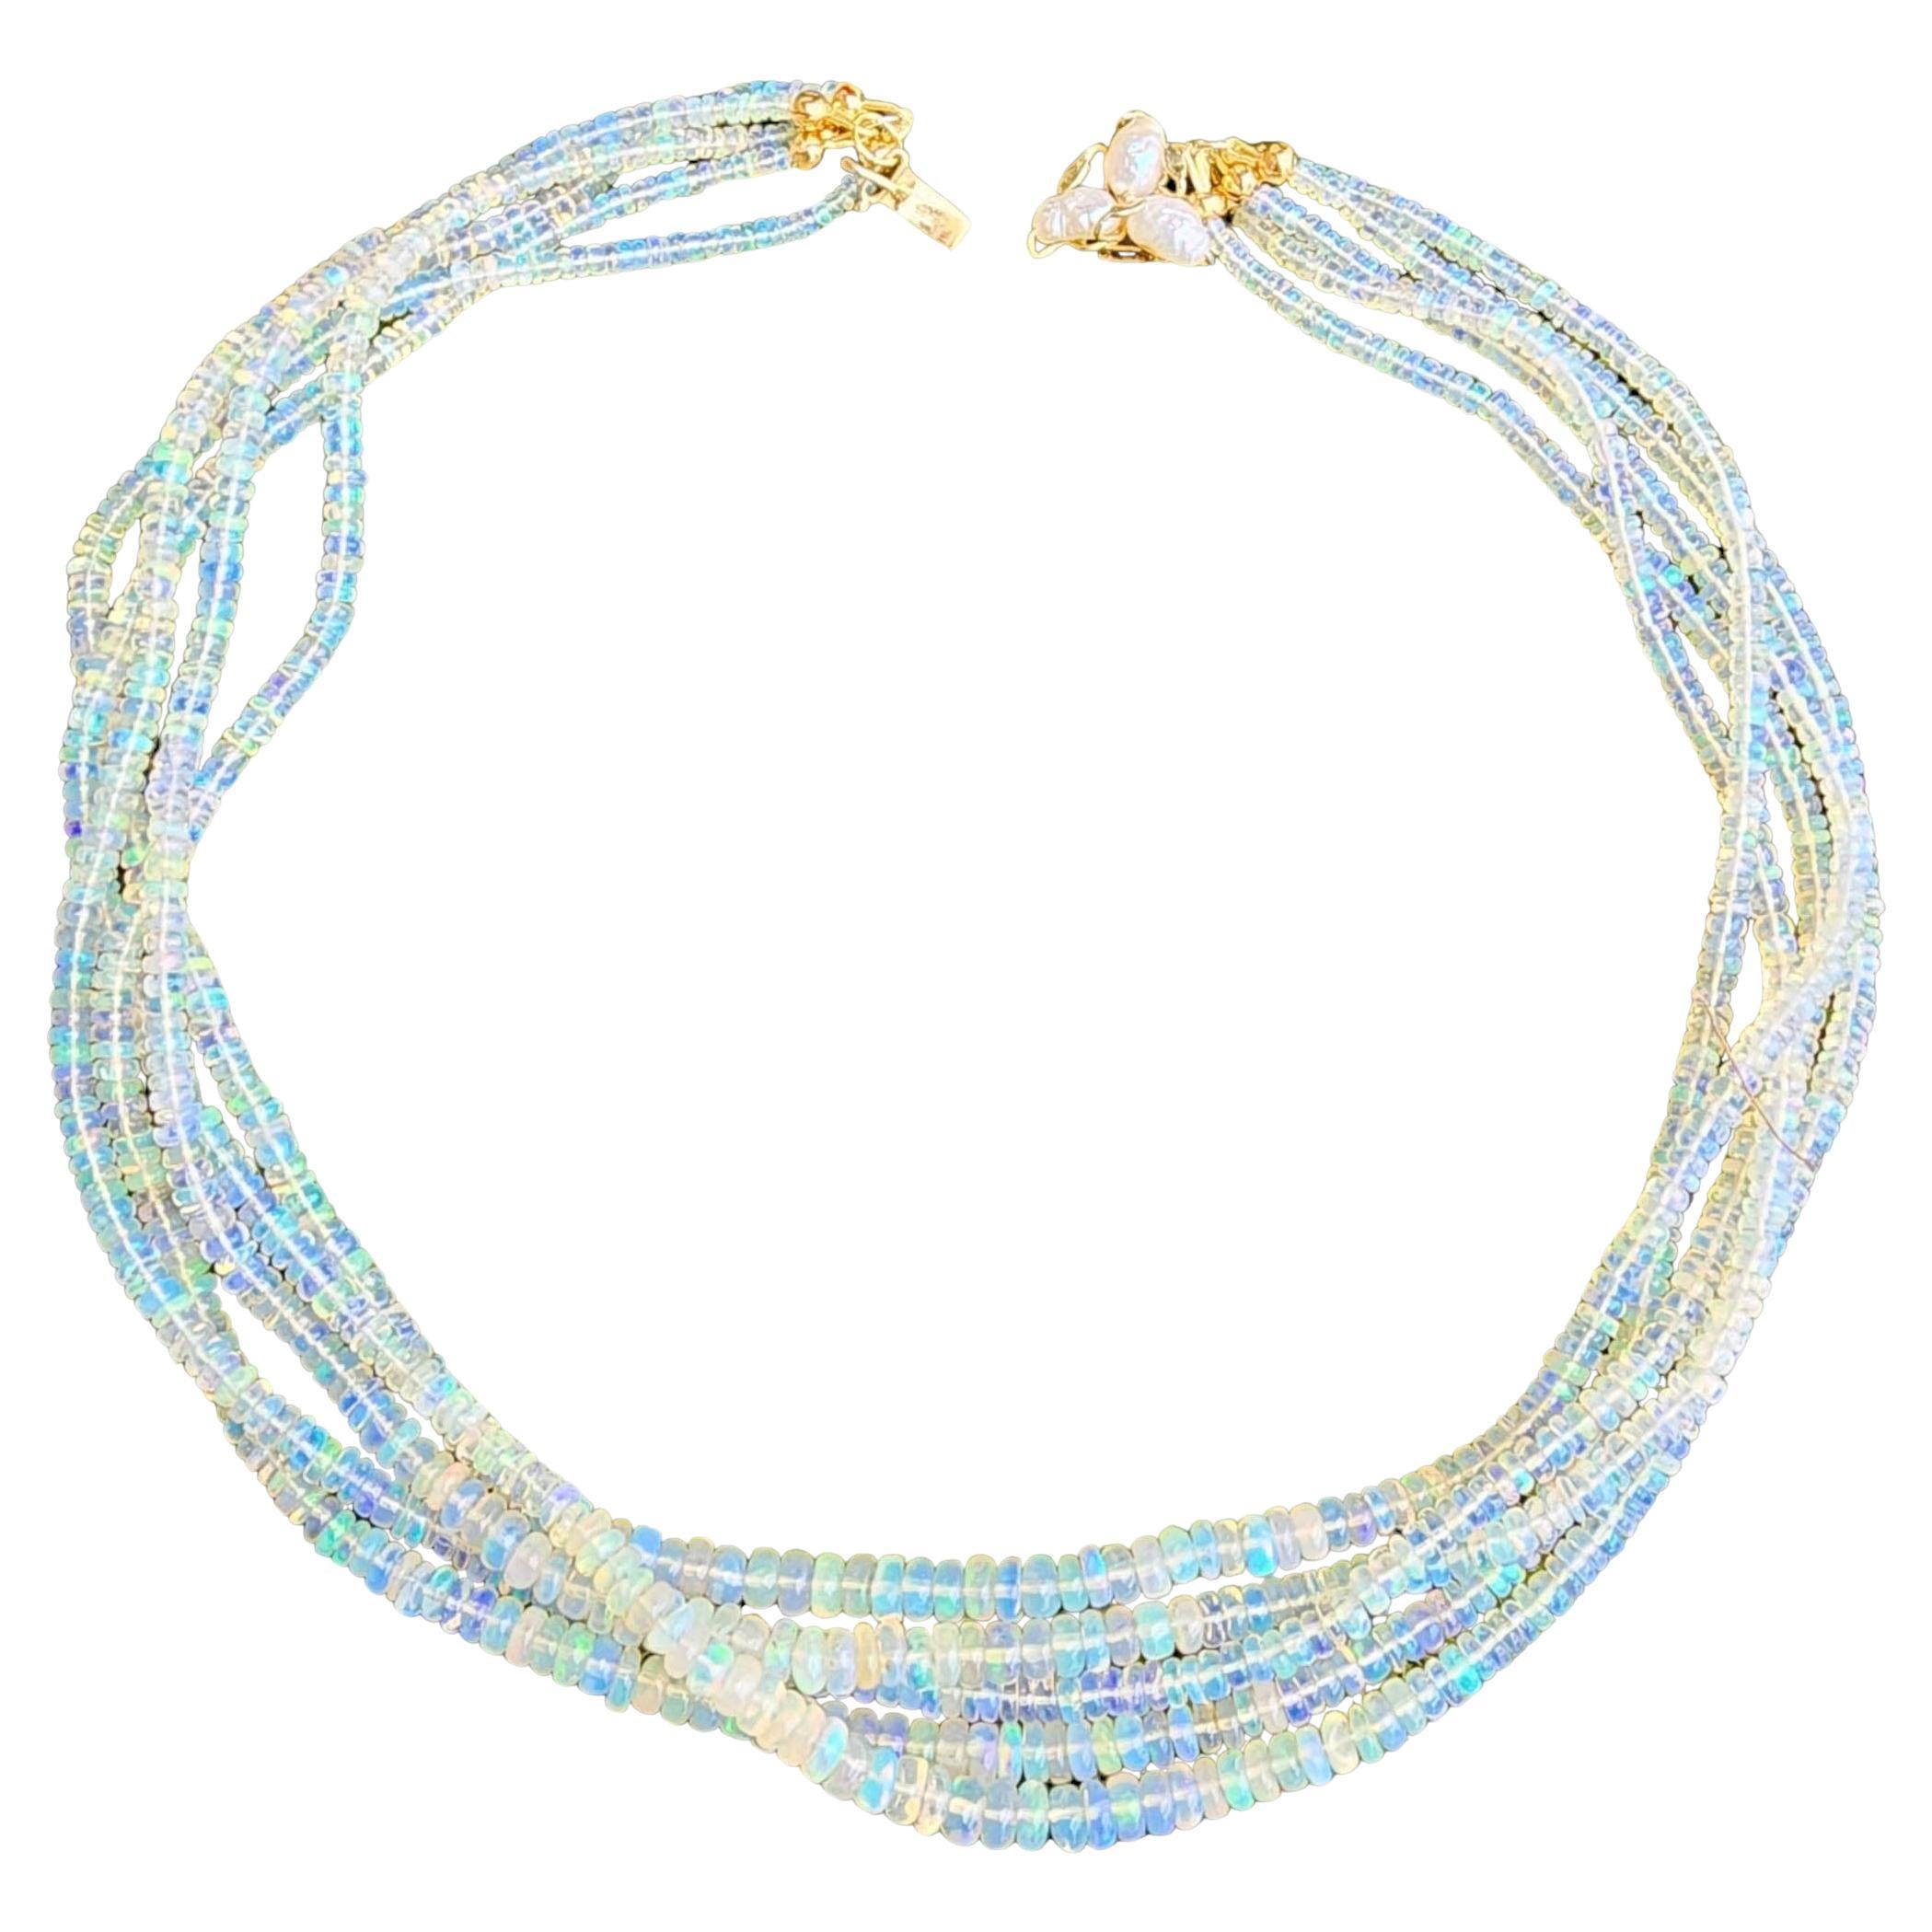 Vintage Multi-Strand Opal Bead Necklace, 14k Gold Clasp With Pearls For Sale